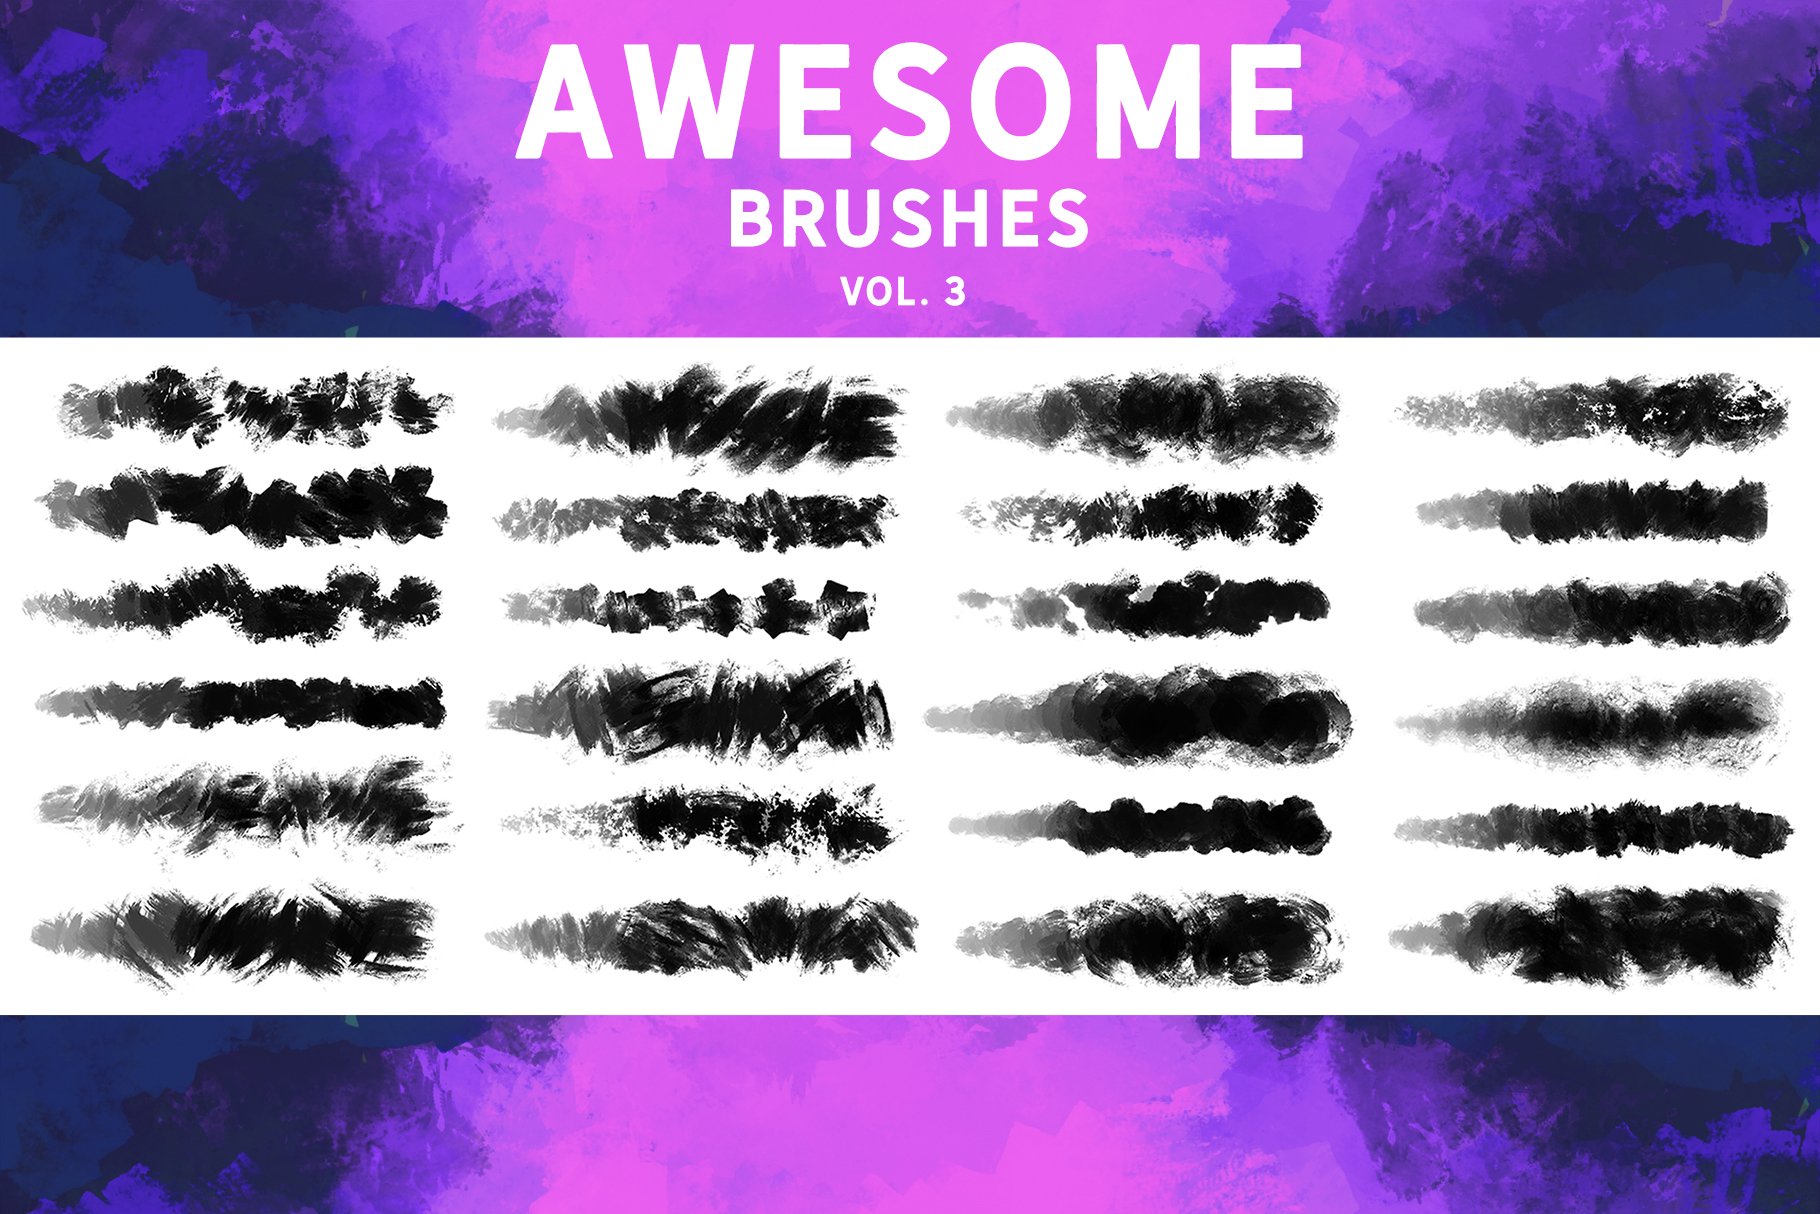 Awesome Brushes Vol 3cover image.